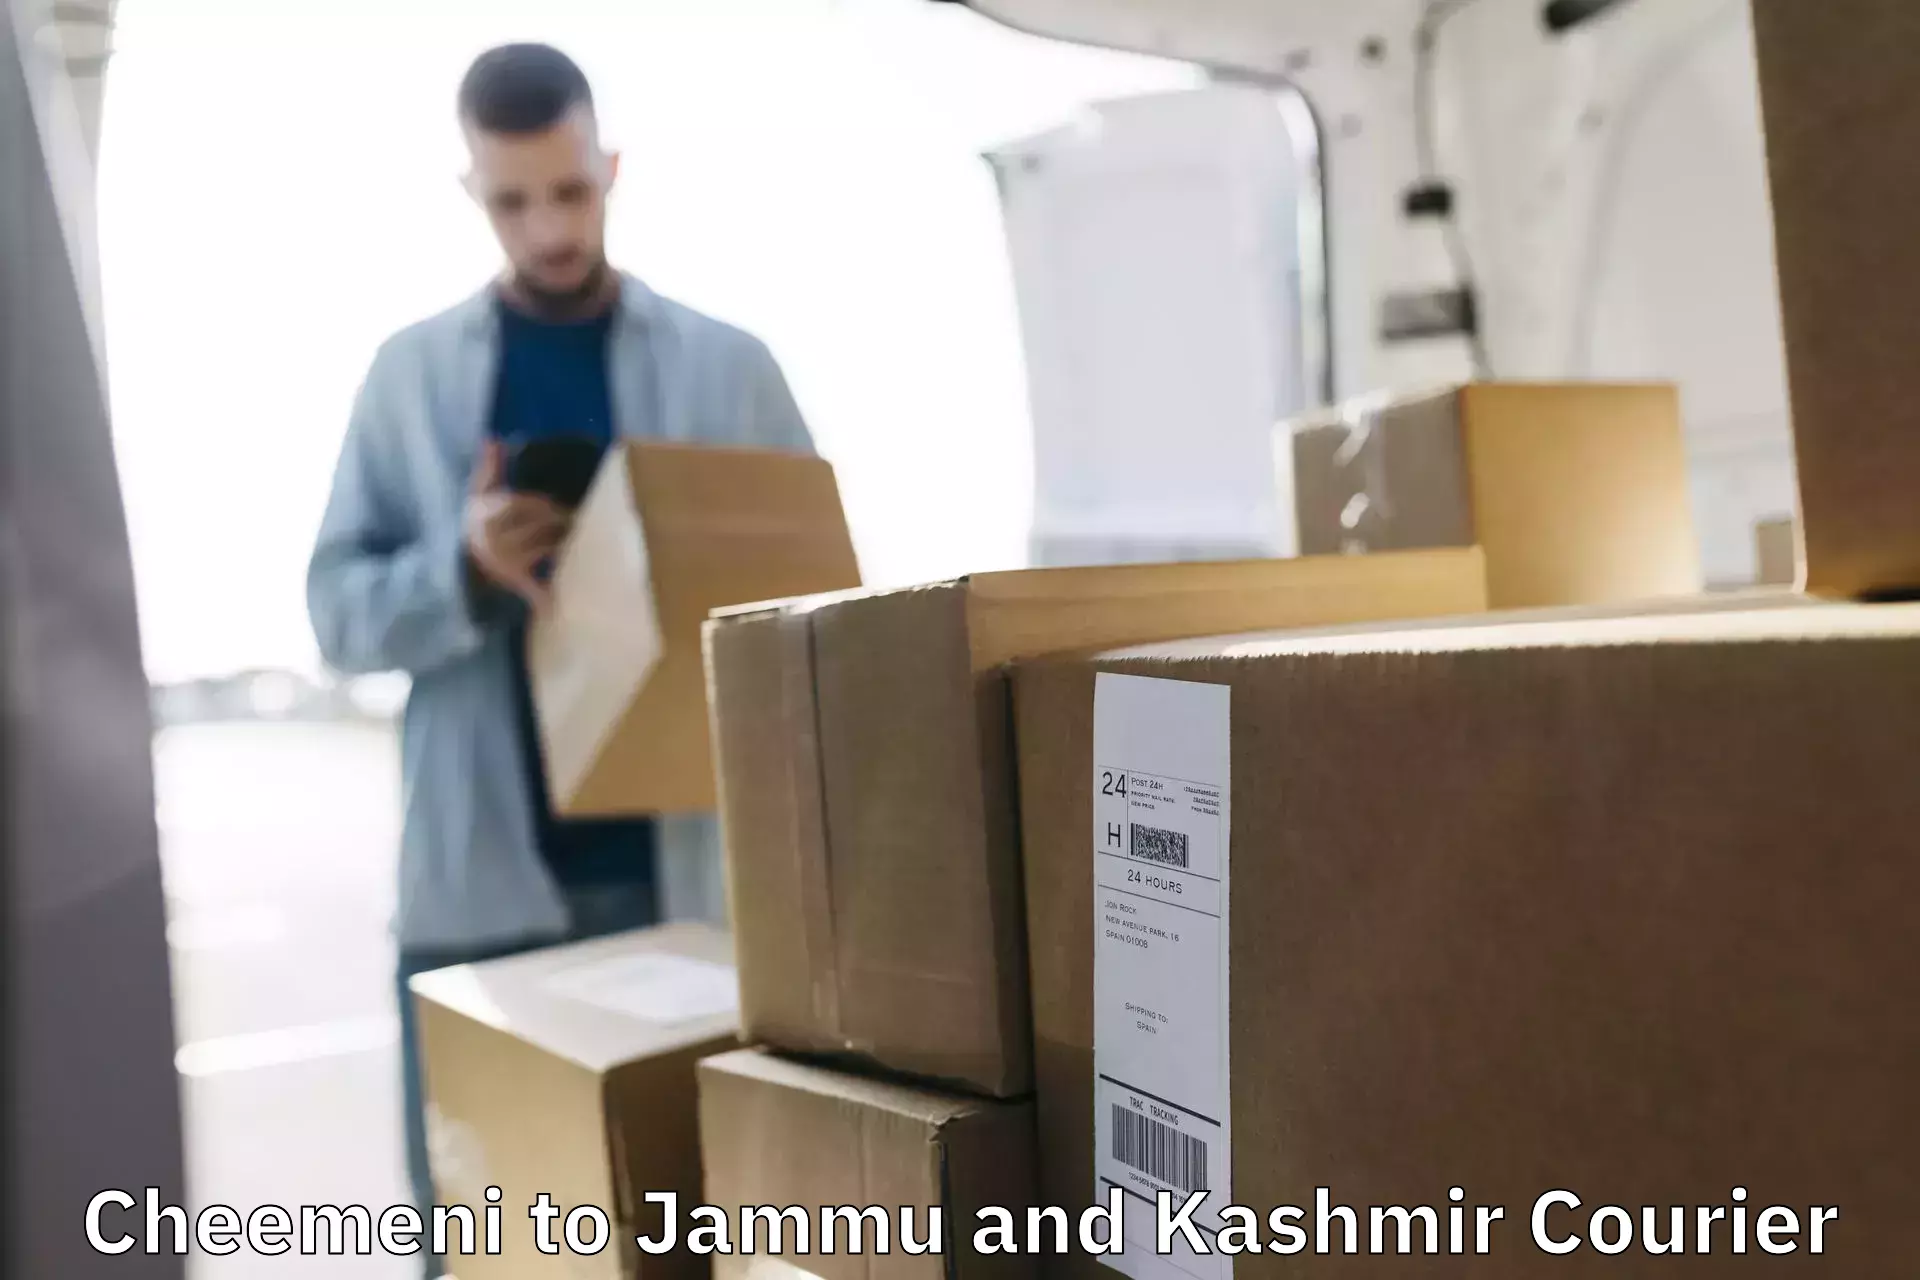 Express delivery capabilities Cheemeni to Jammu and Kashmir